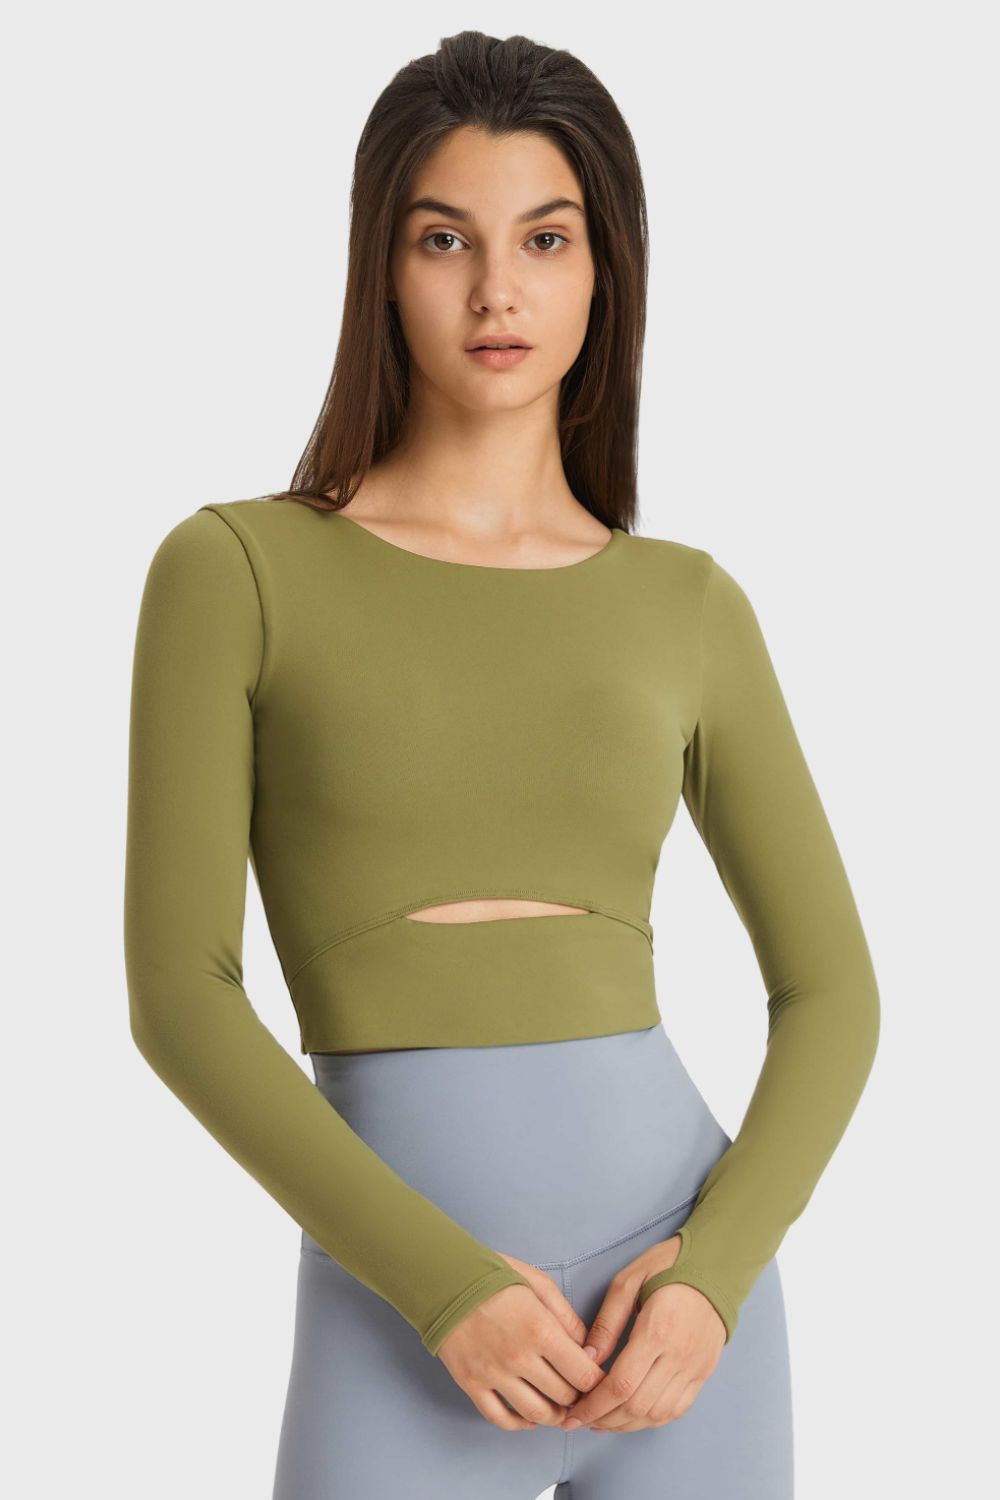 Cutout Cropped Sports Top